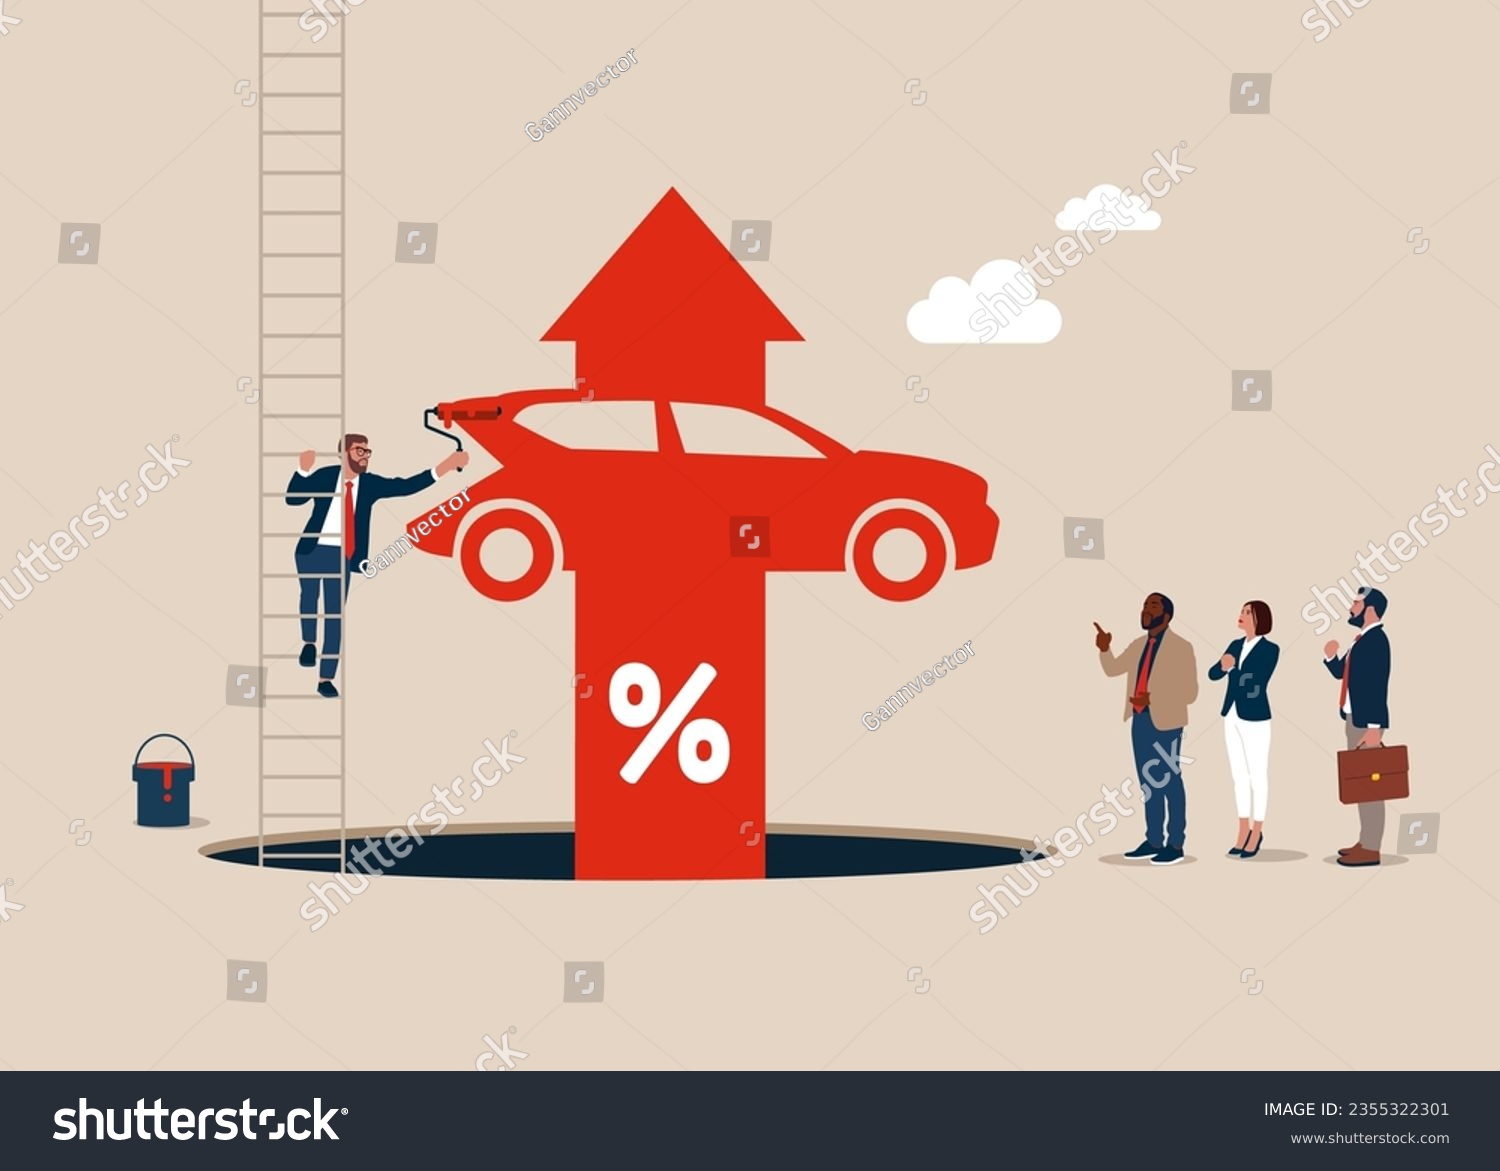 SVG of Car stock pice soaring, earning and profit increase in new economy stock market. svg